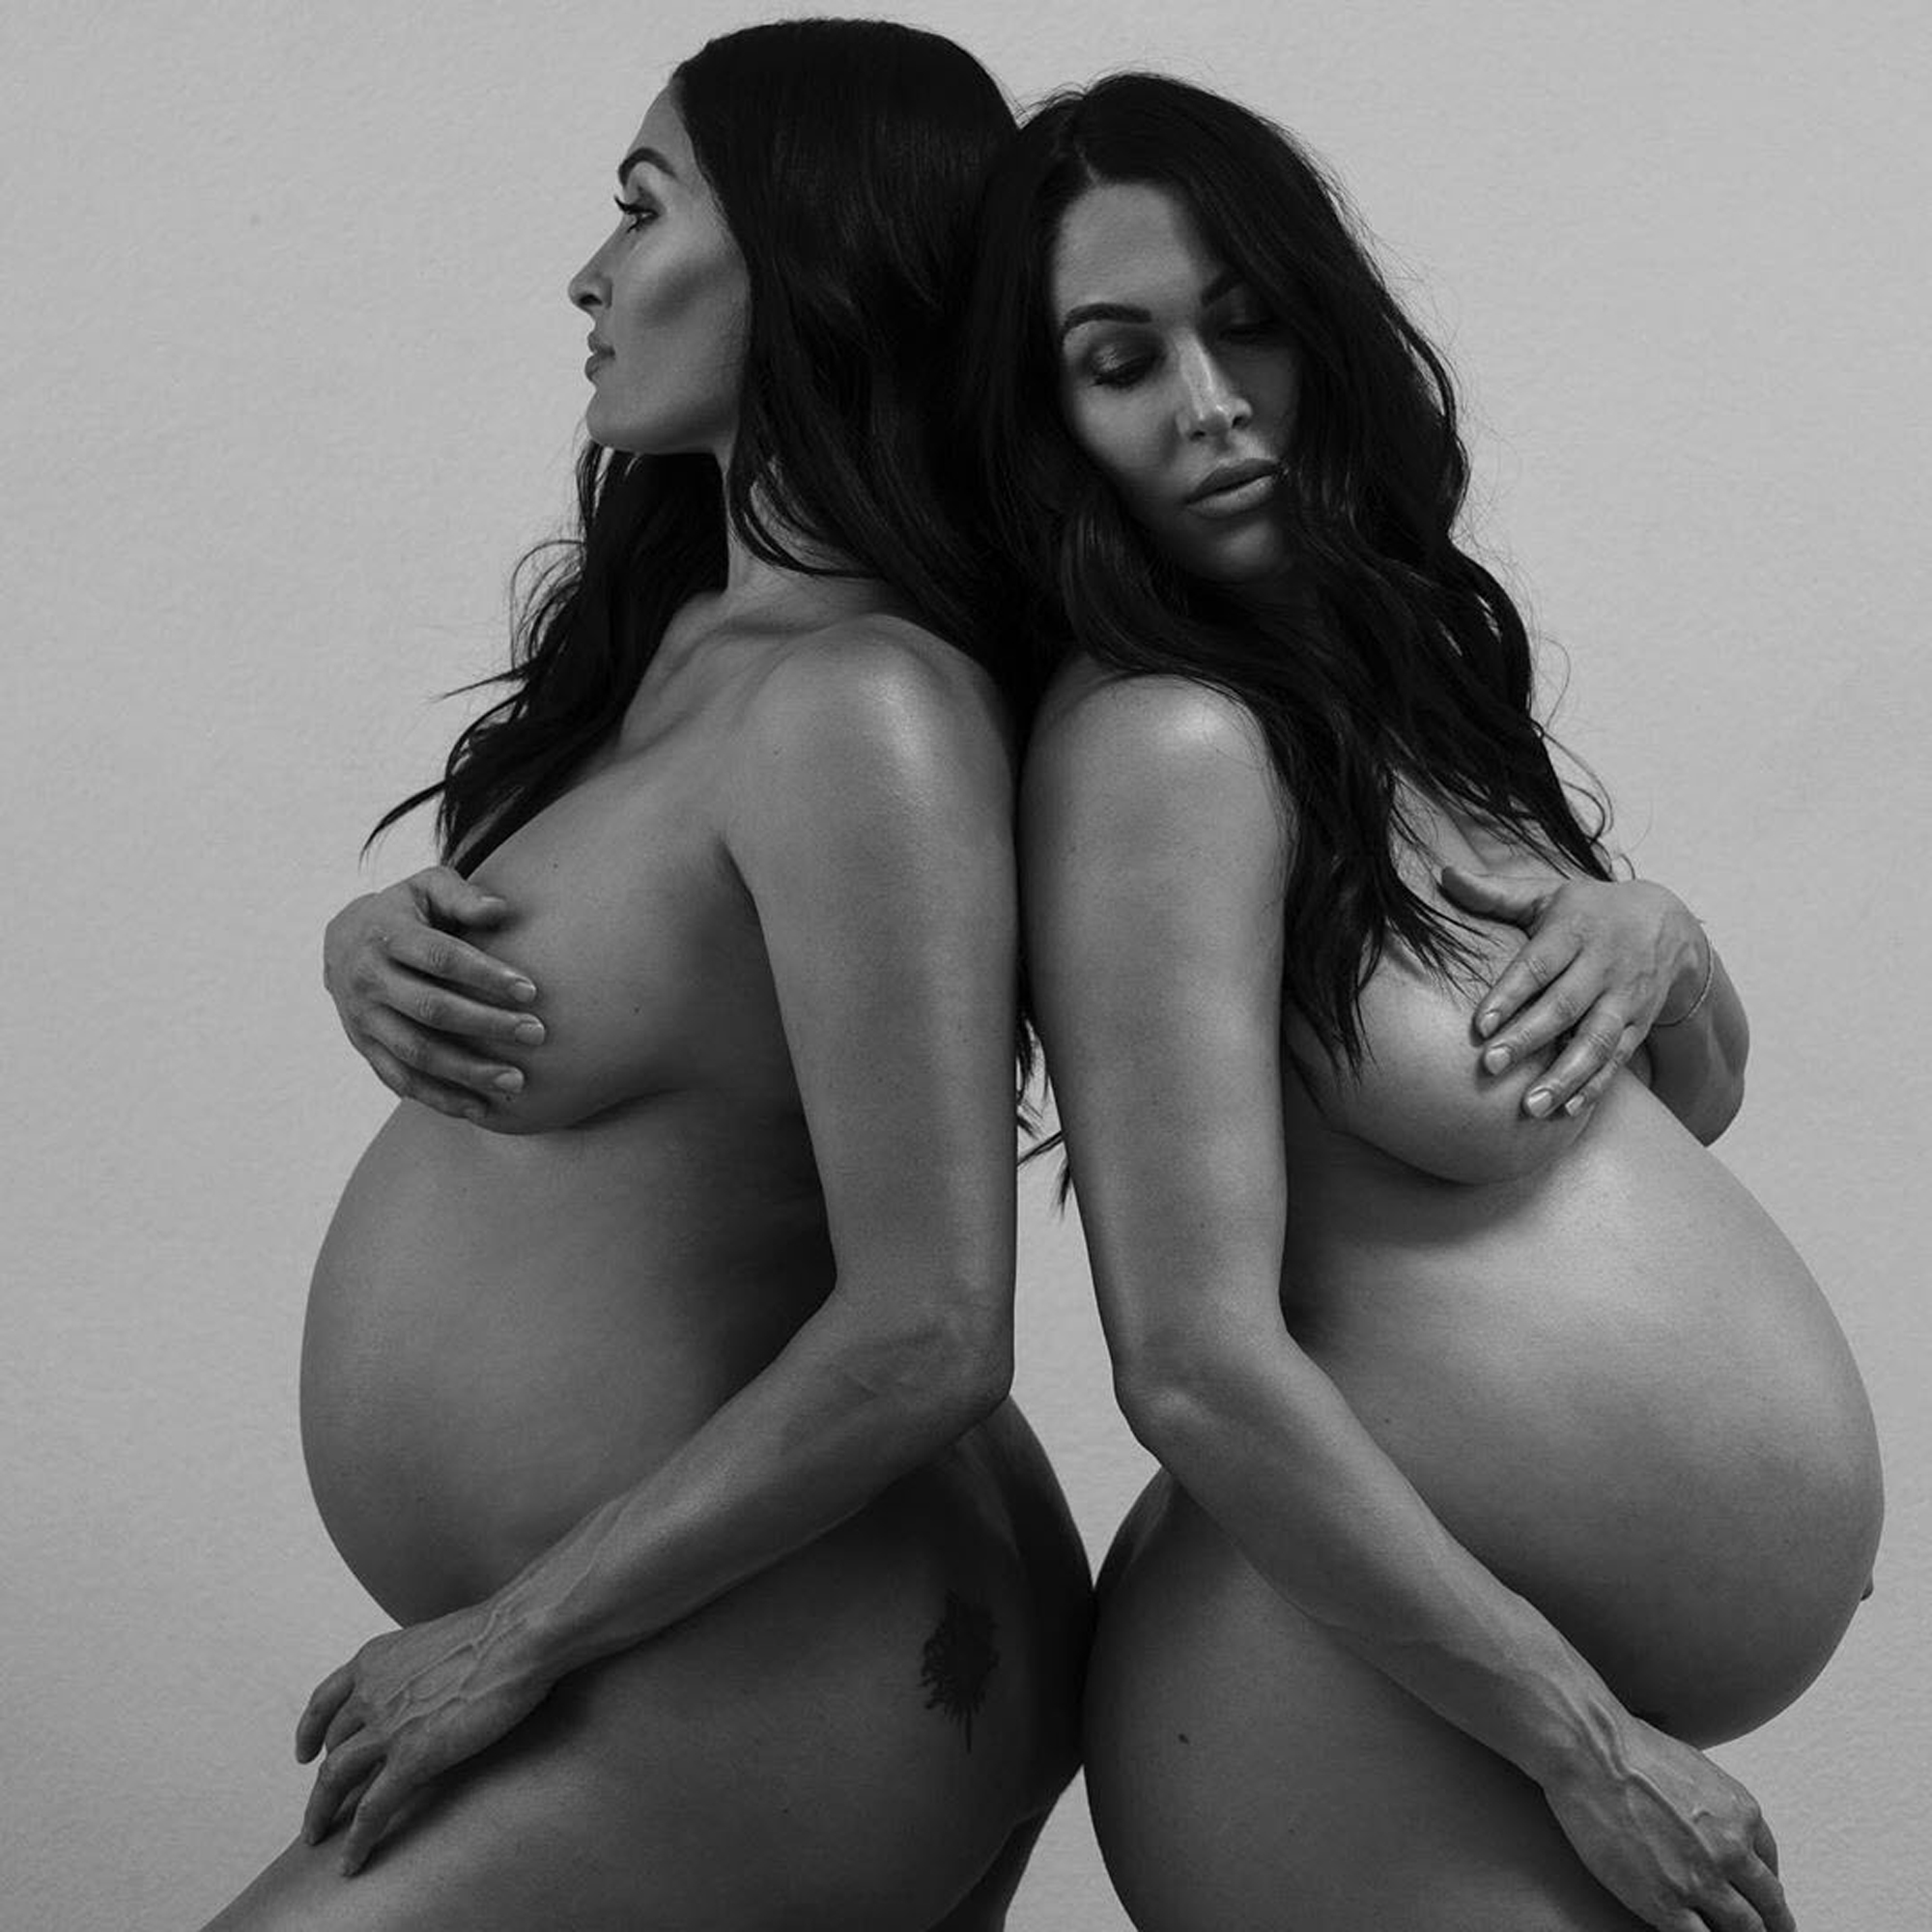 9 Months Pregnant Nude Black - Pregnant Nikki, Brie Bella Pose Nude Ahead of Birth: Baby Bump Pics